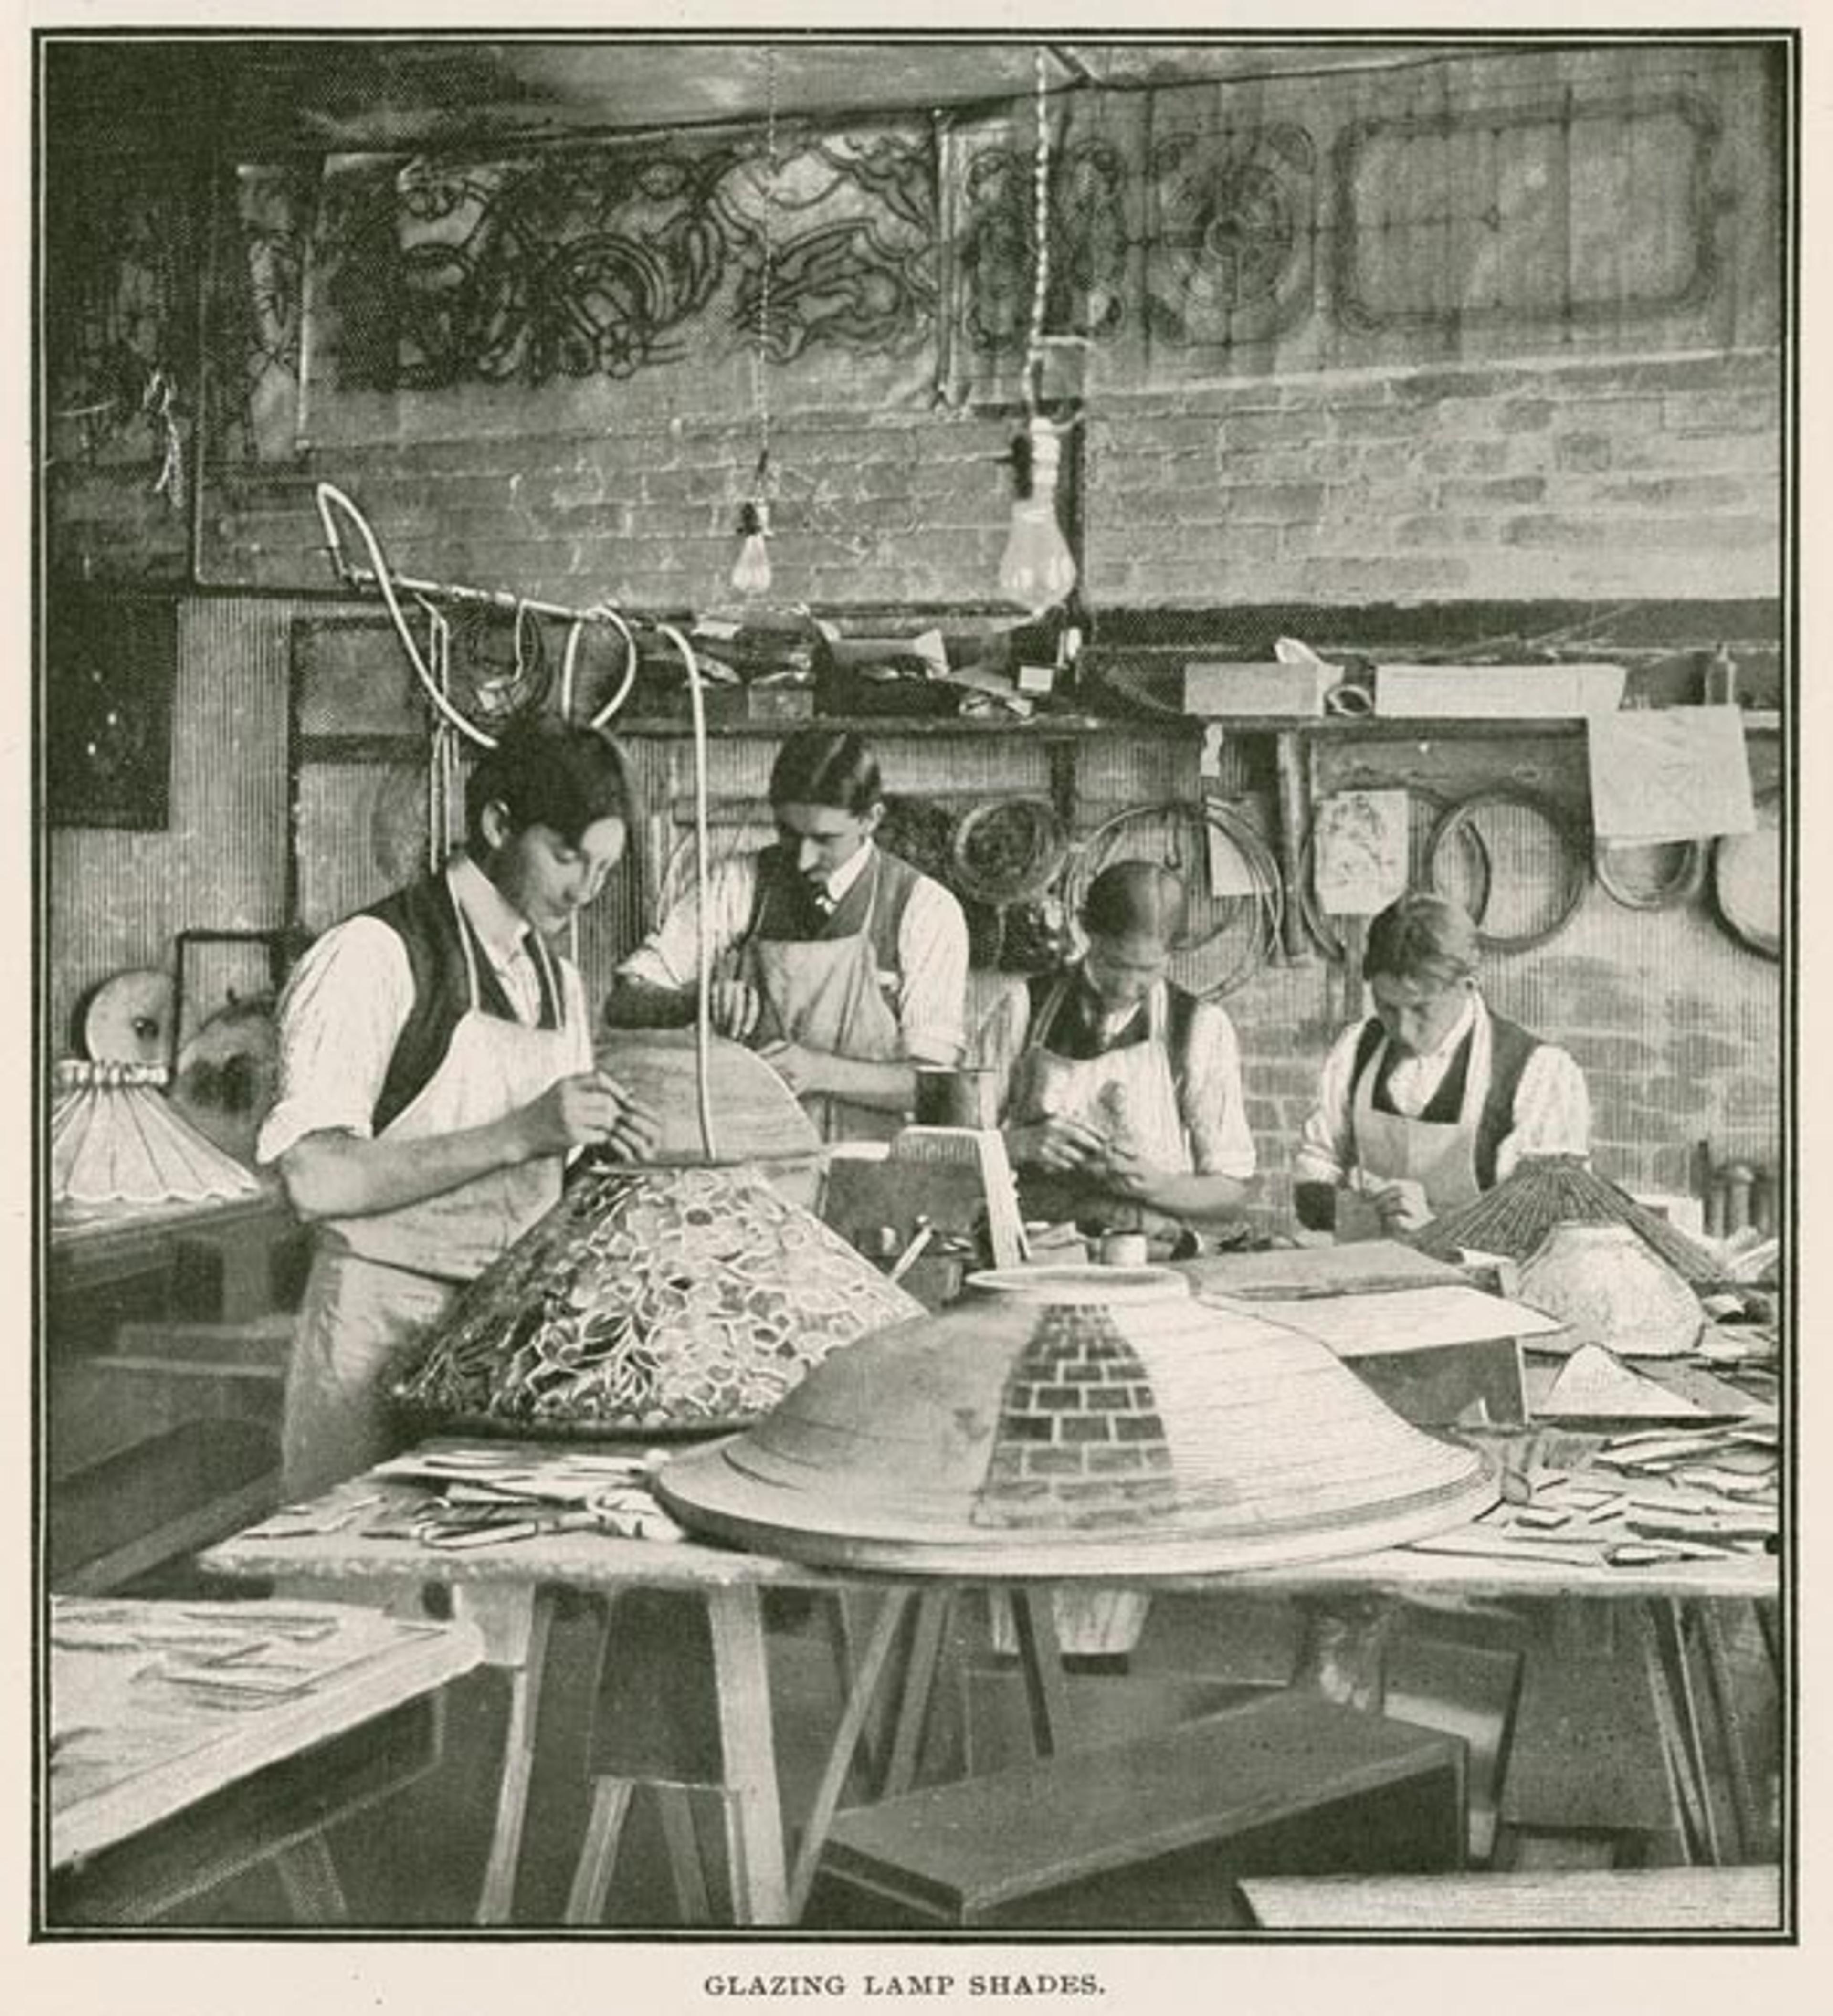 Workers in Tiffany’s lamp department studio, ca. 1898. From The Cosmopolitan: A Monthly Illustrated Magazine (January 1899).